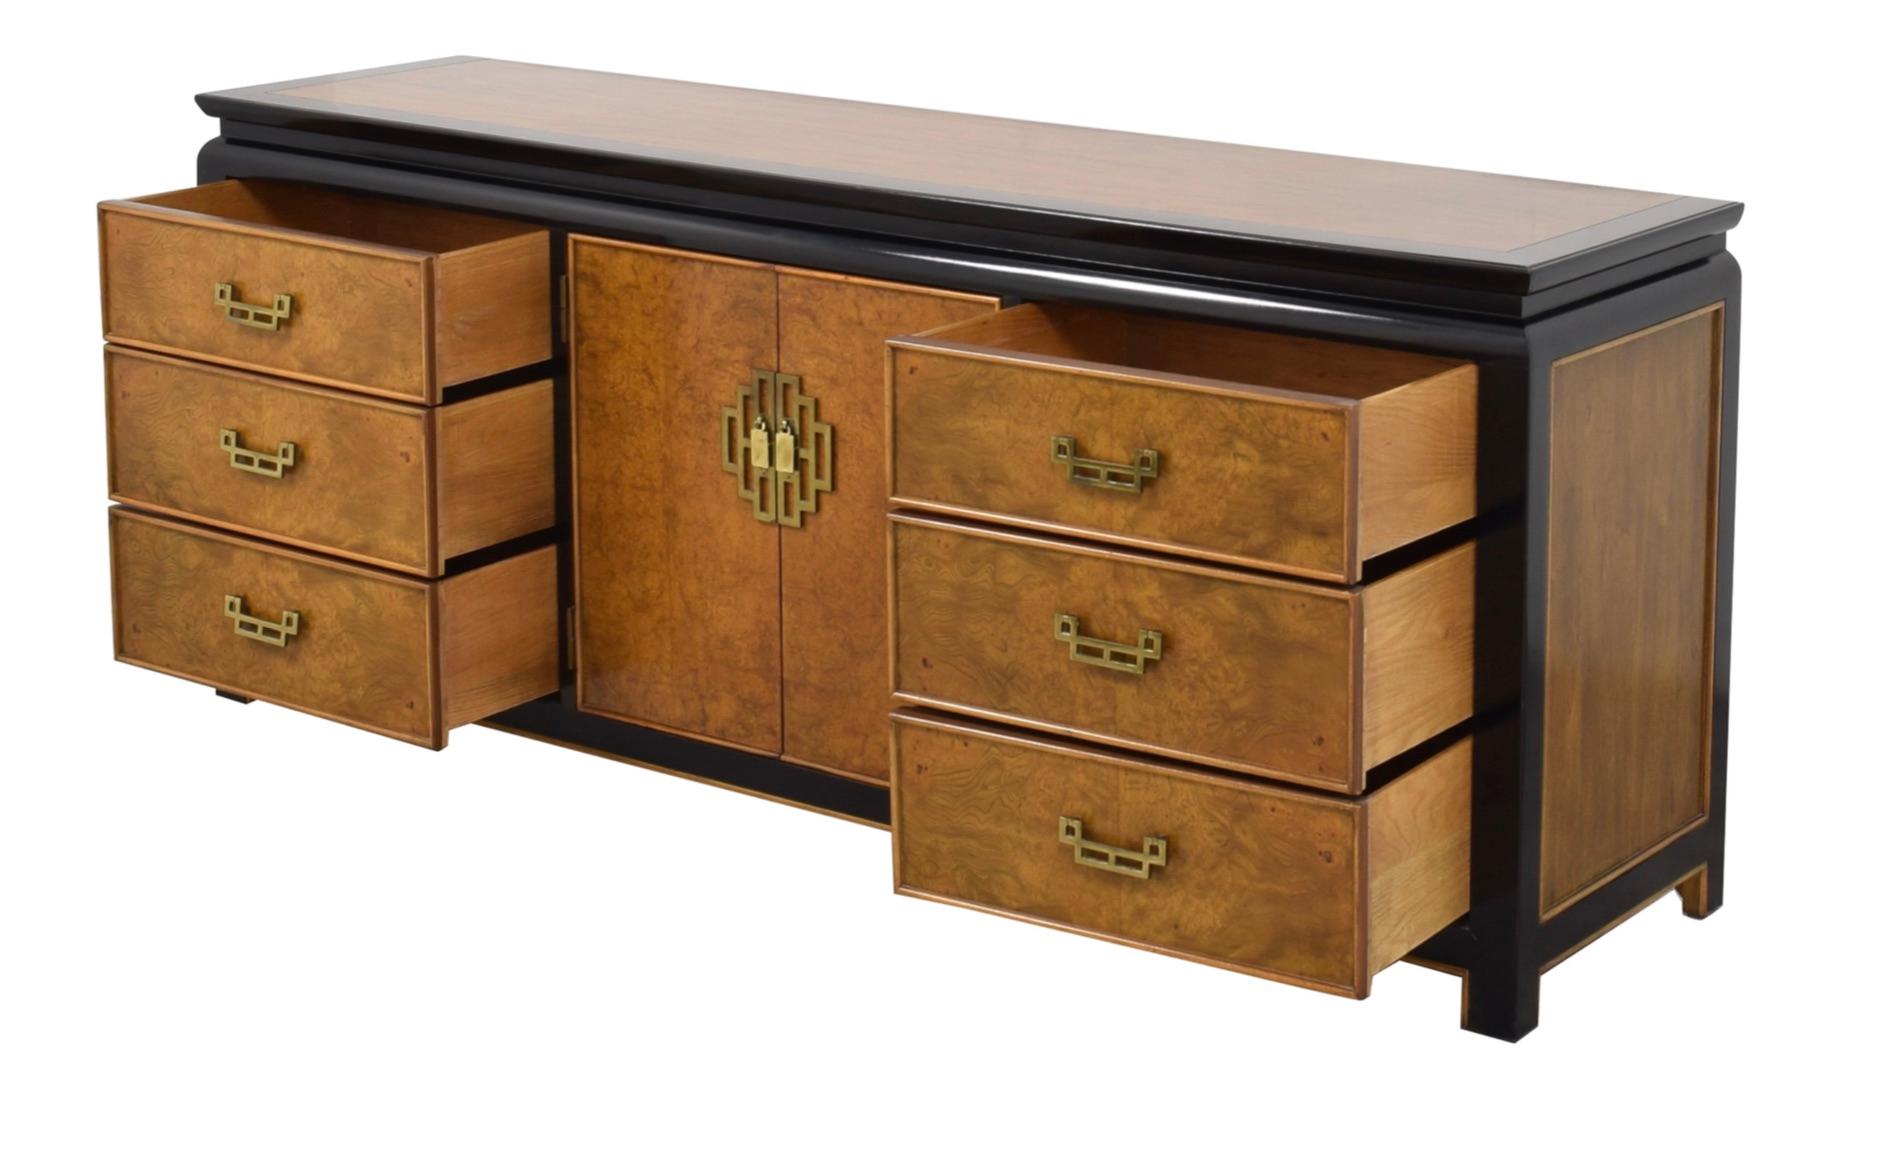 Hollywood Regency burl wood dresser by Ray Sabota for Century Furniture, for the iconic 